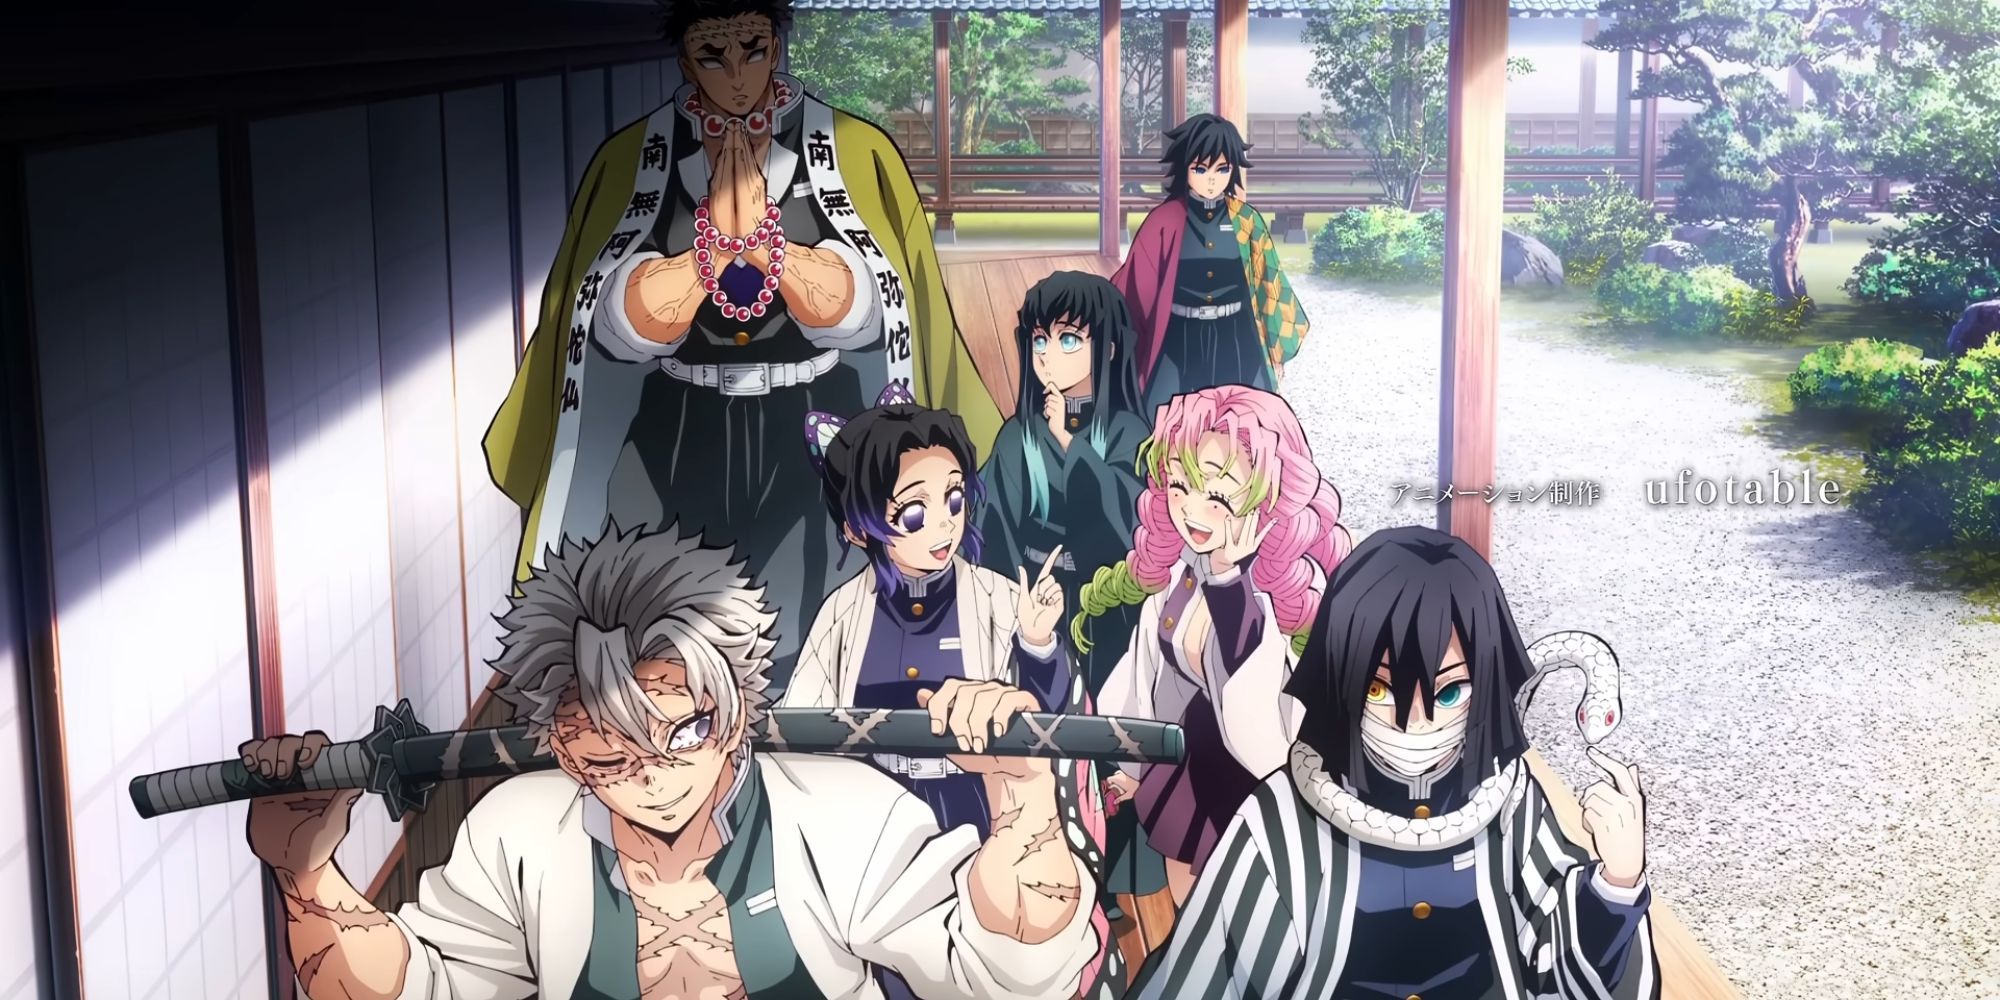 The remaining Hashira prepare themselves to train the demon slayers in the fifth Demon Slayer opening.